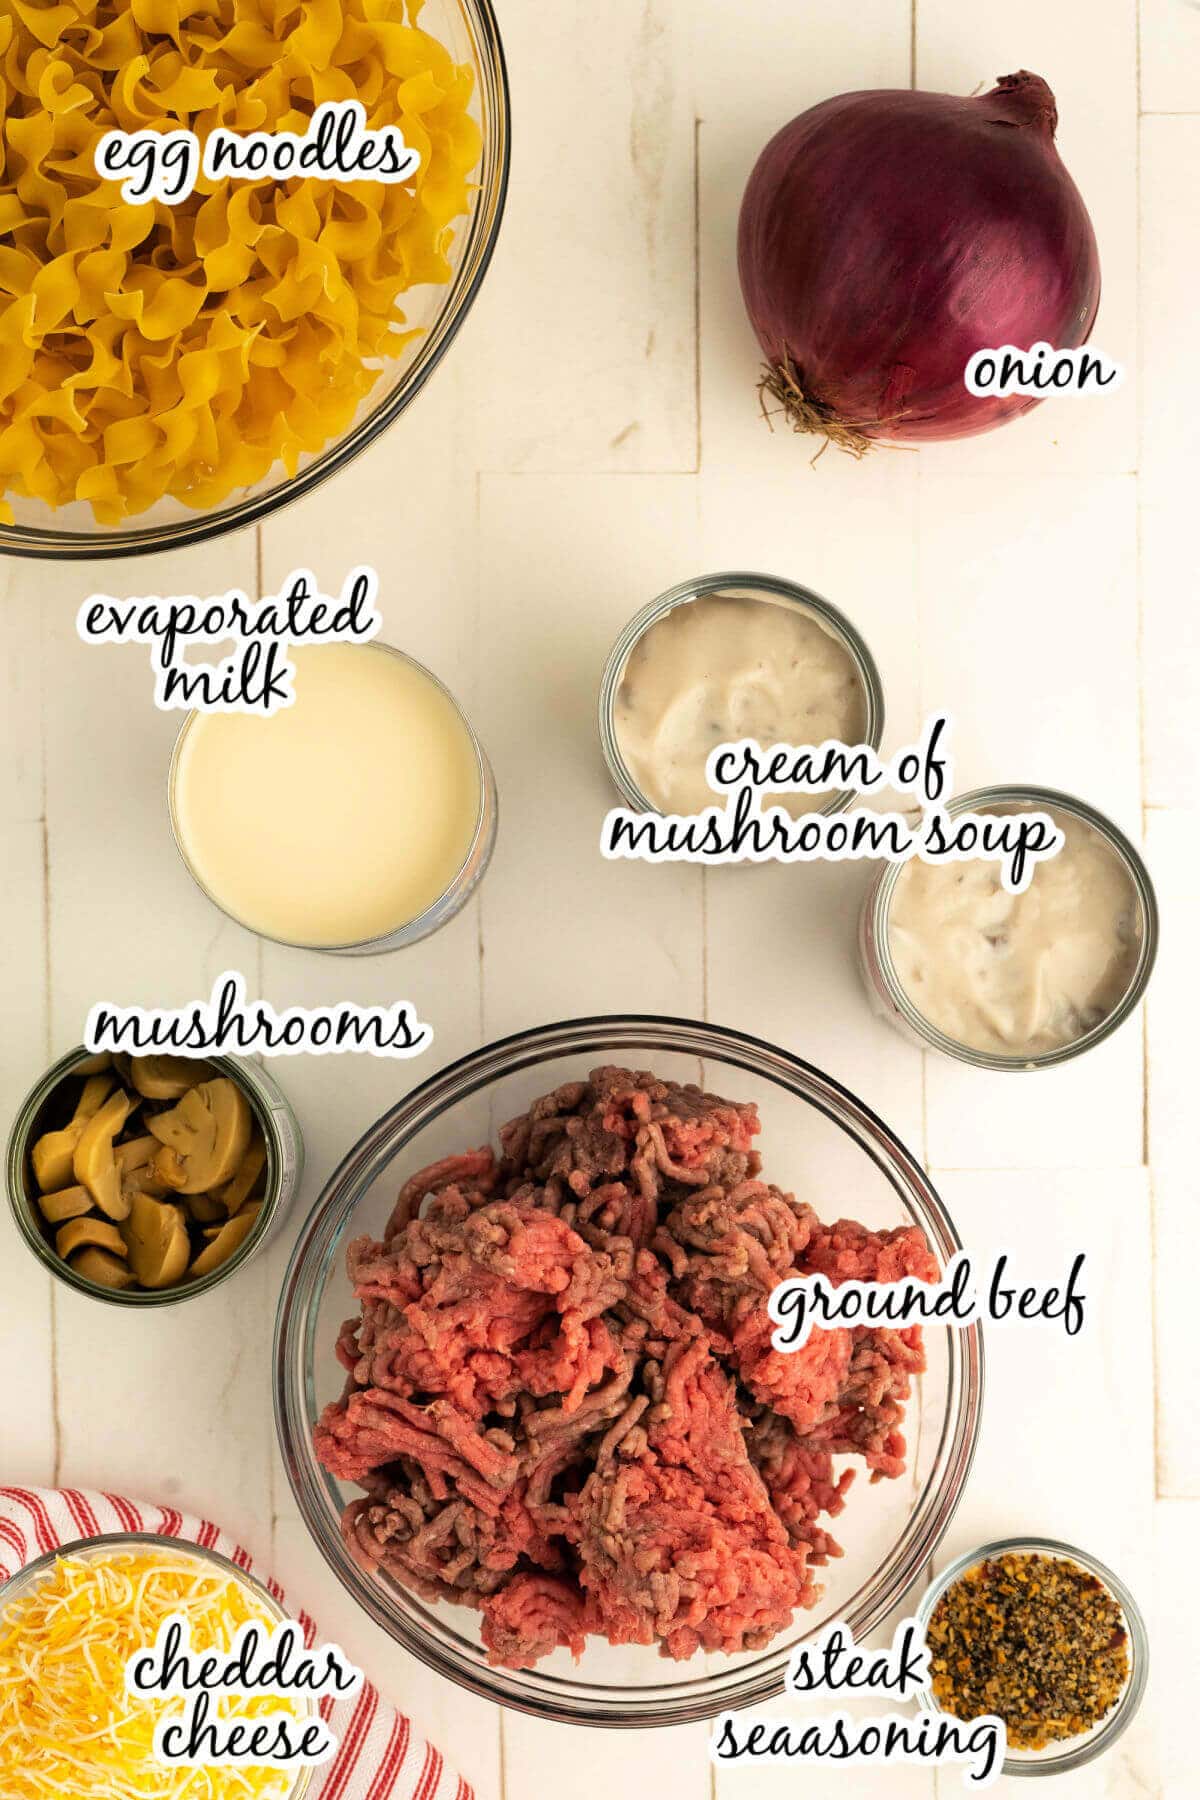 Ingredients for beef stroganoff recipe. With print overlay. 